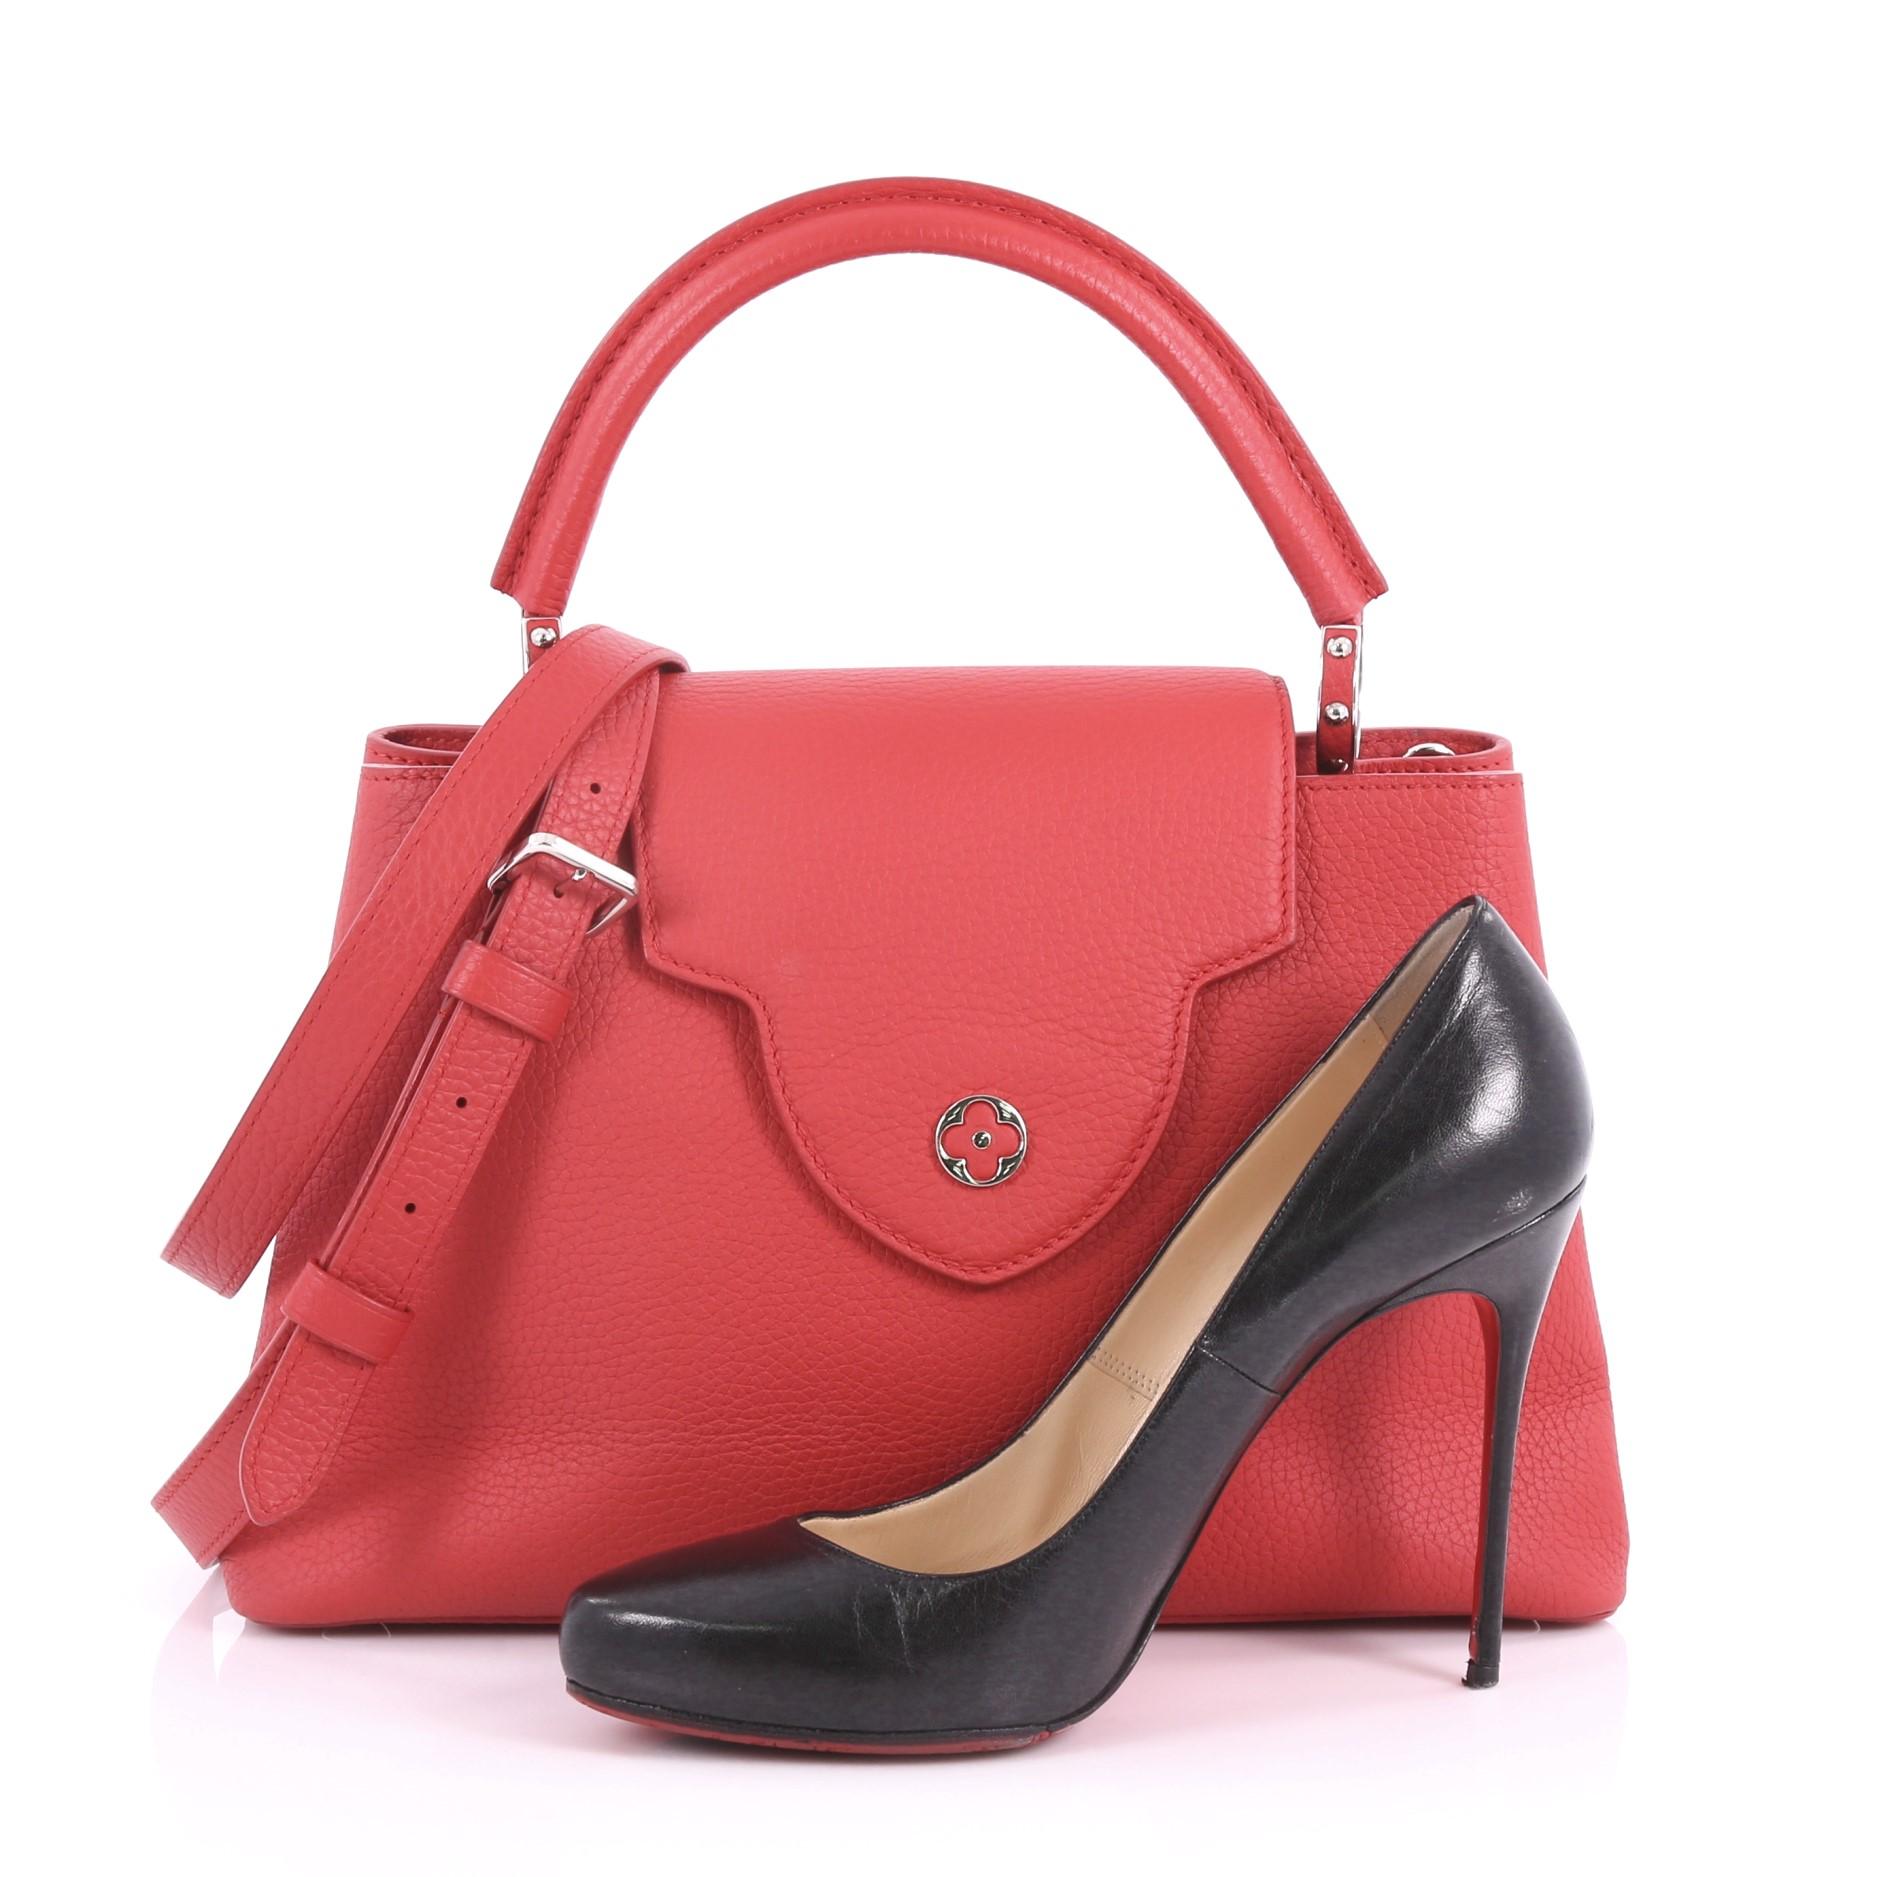 This authentic Louis Vuitton Capucines Handbag Leather PM is a sophisticated and ladylike luxurious bag inspired by its Parisian heritage. Crafted from red taurillon leather, this chic bag features a single loop leather handle secured by jewel-like